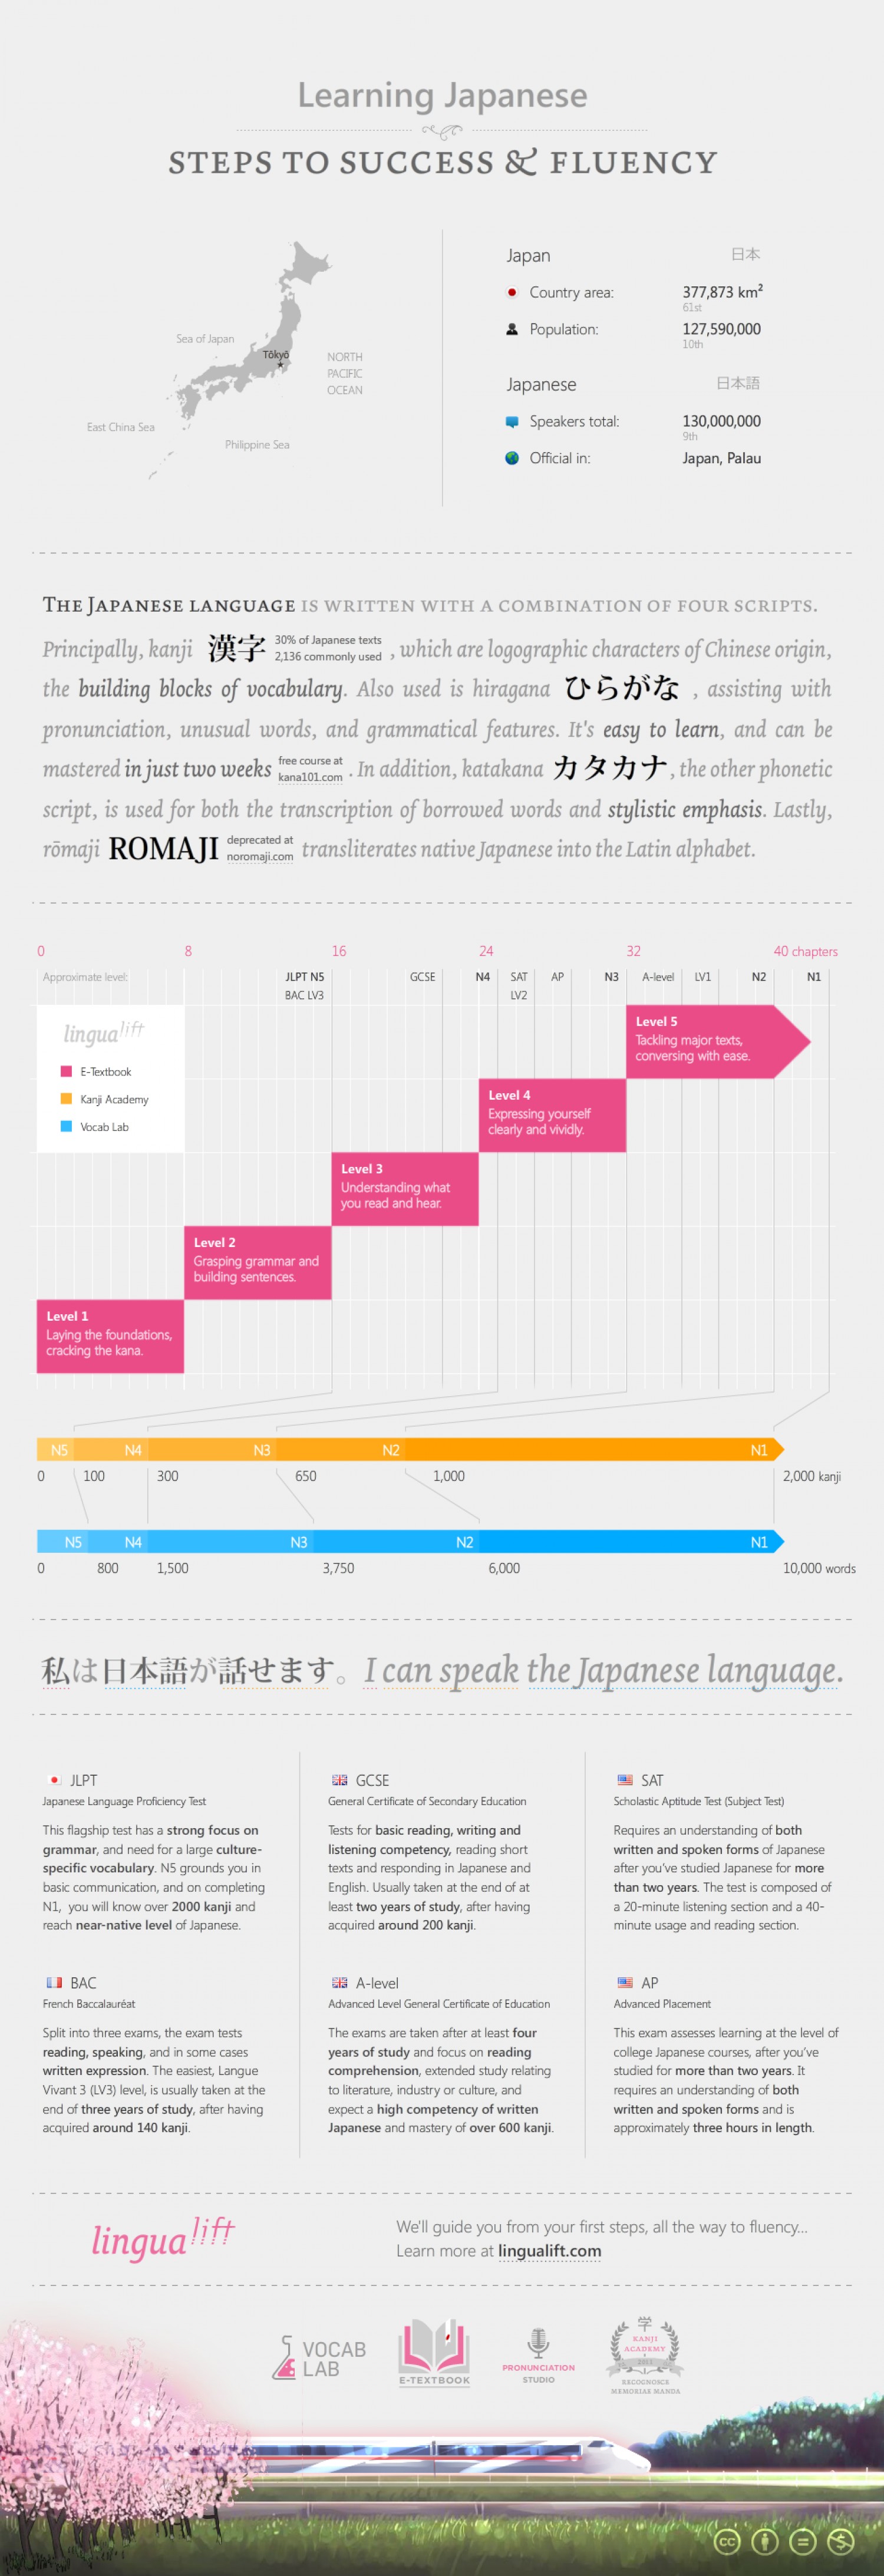 Learning Japanese: Steps to Success & Fluency